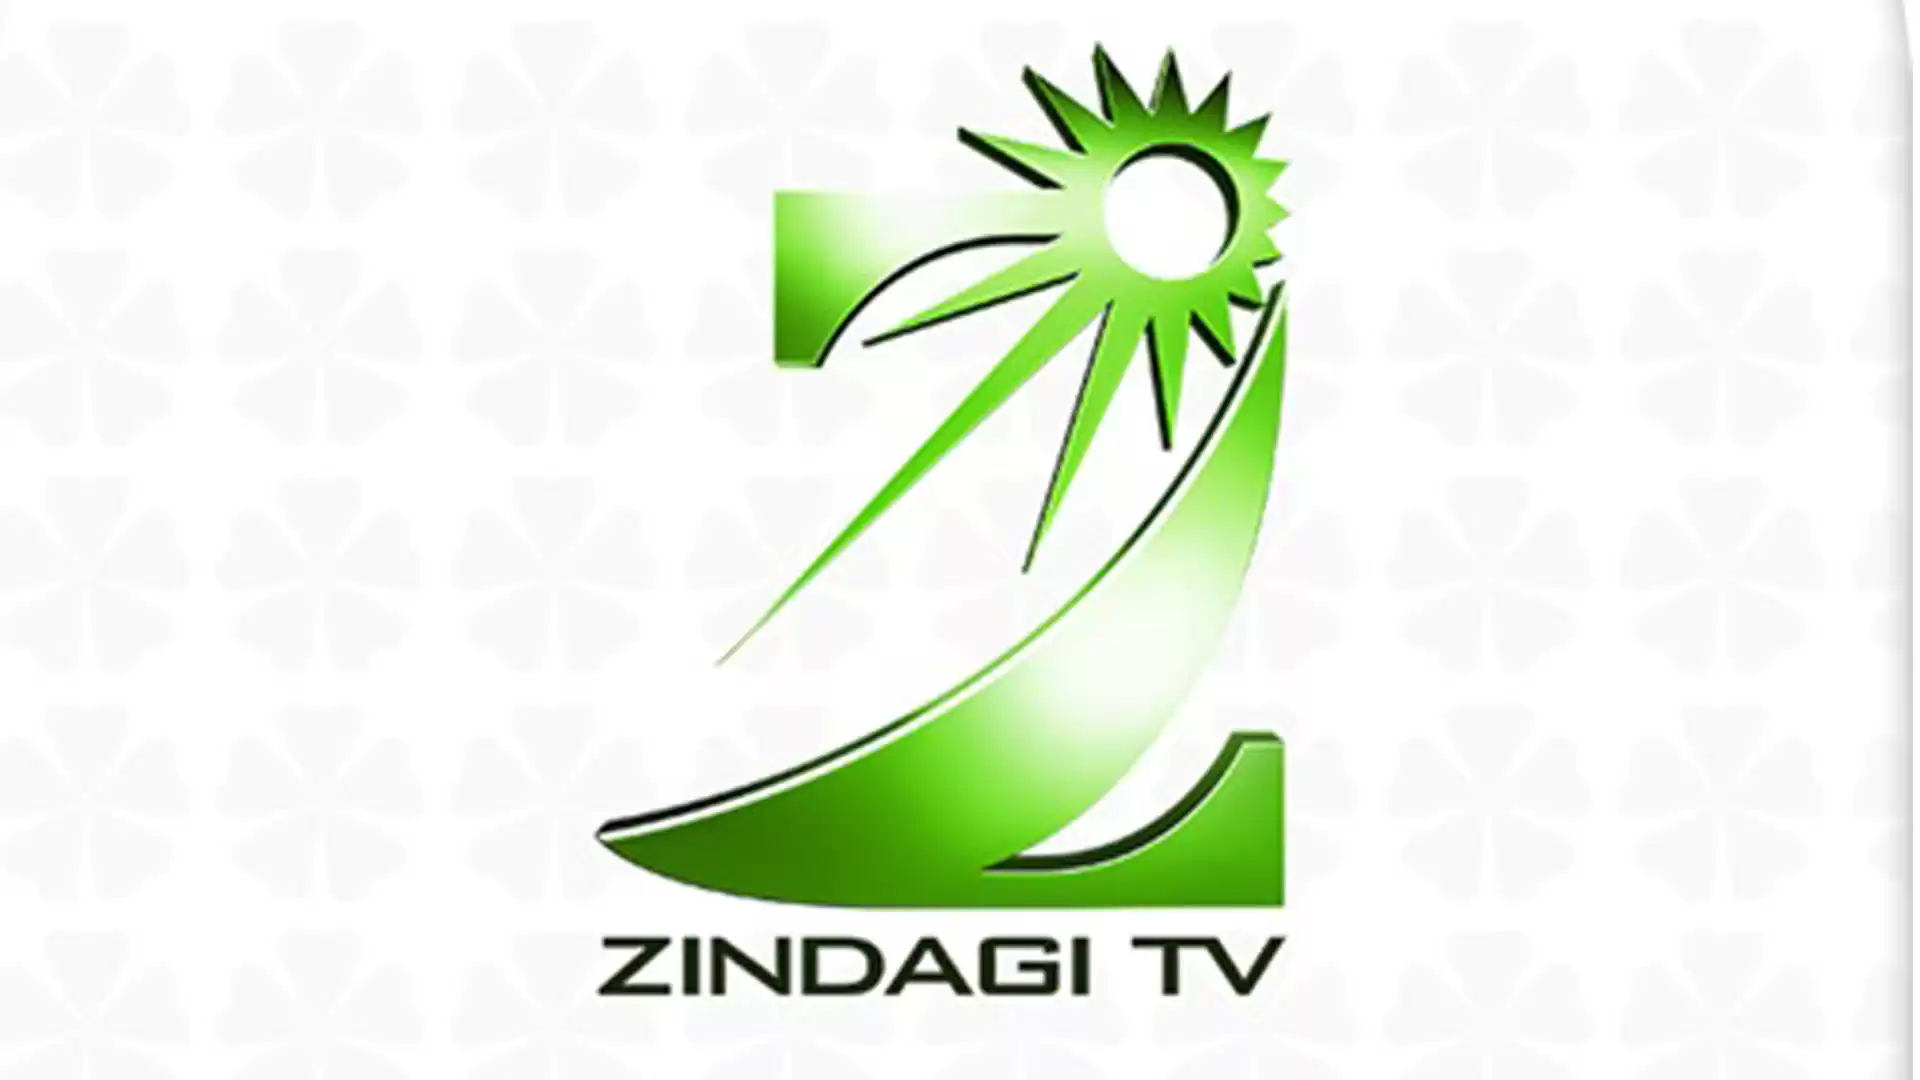 Airtel joins forces with Zindagi to bring popular shows to its TV audience